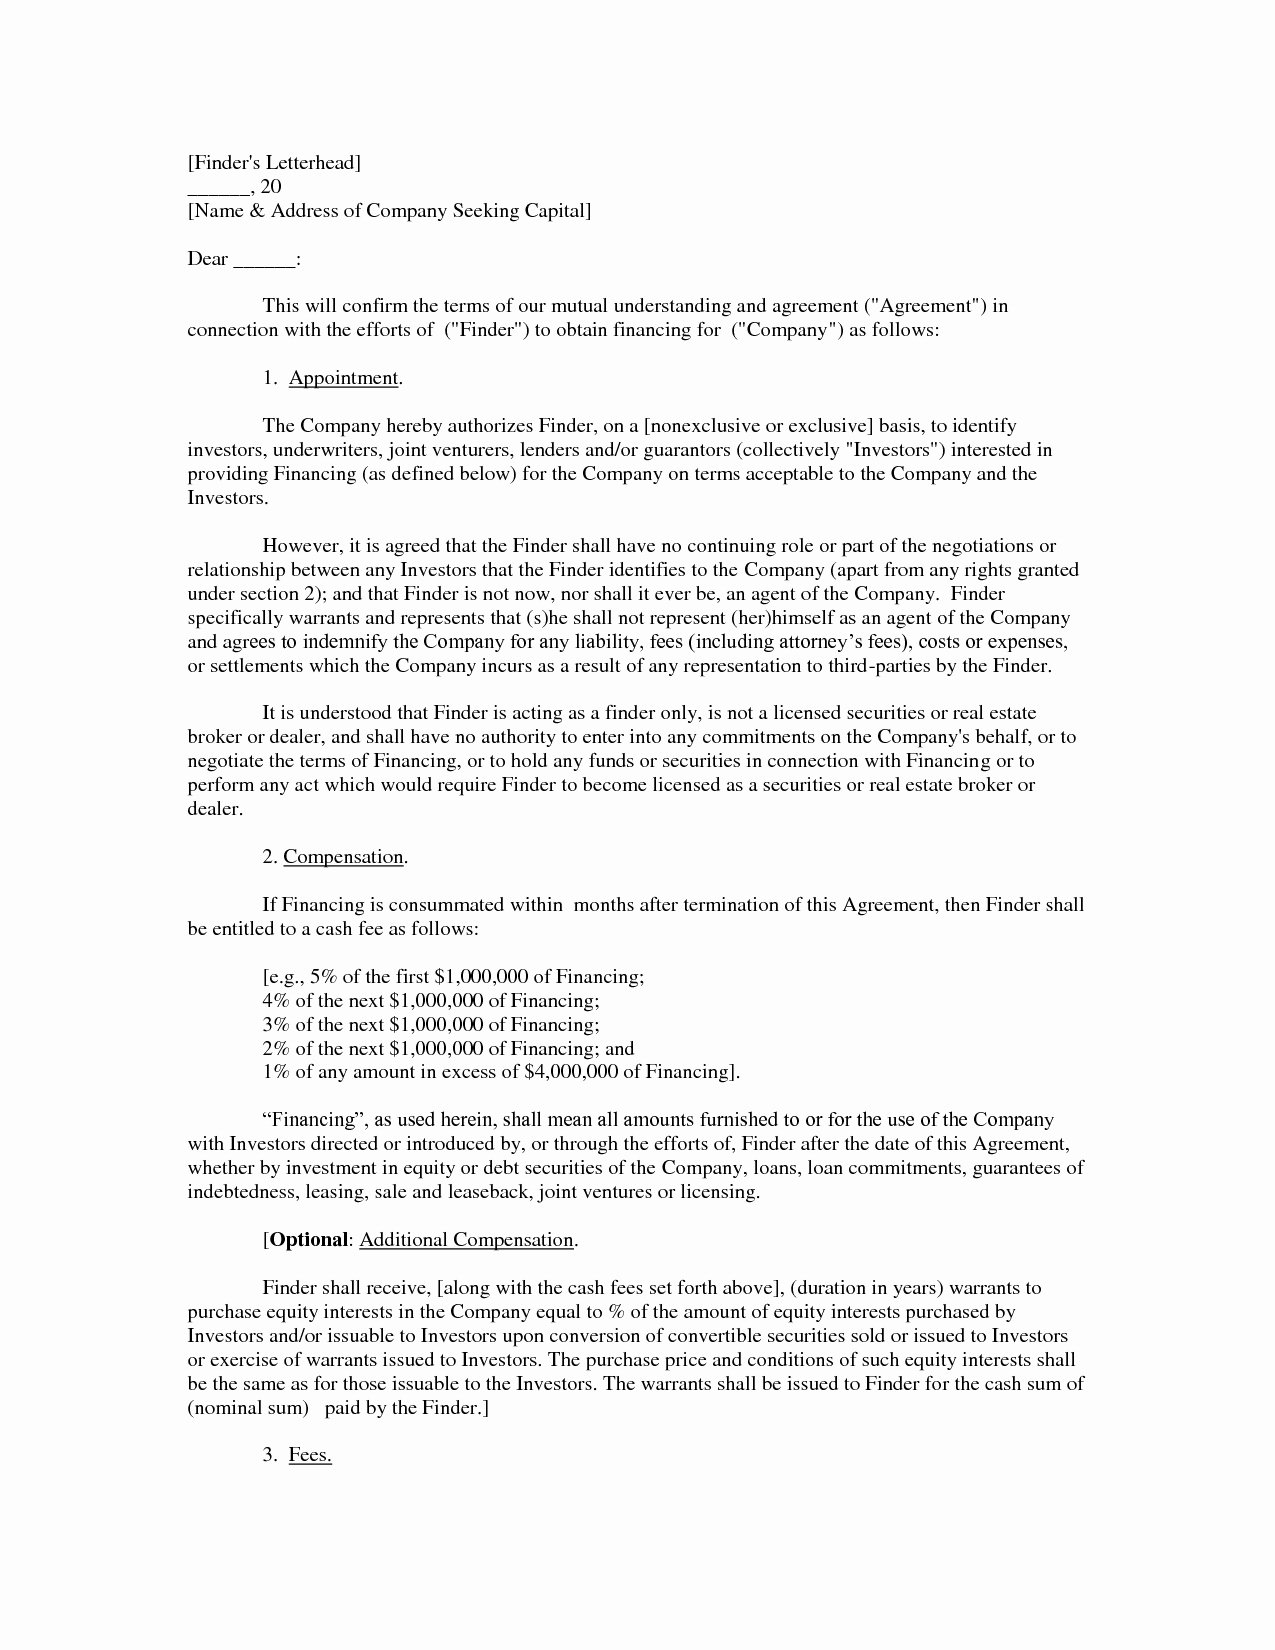 Letters Of Agreement Templates Beautiful Letter Agreement Template Between Two Parties Examples